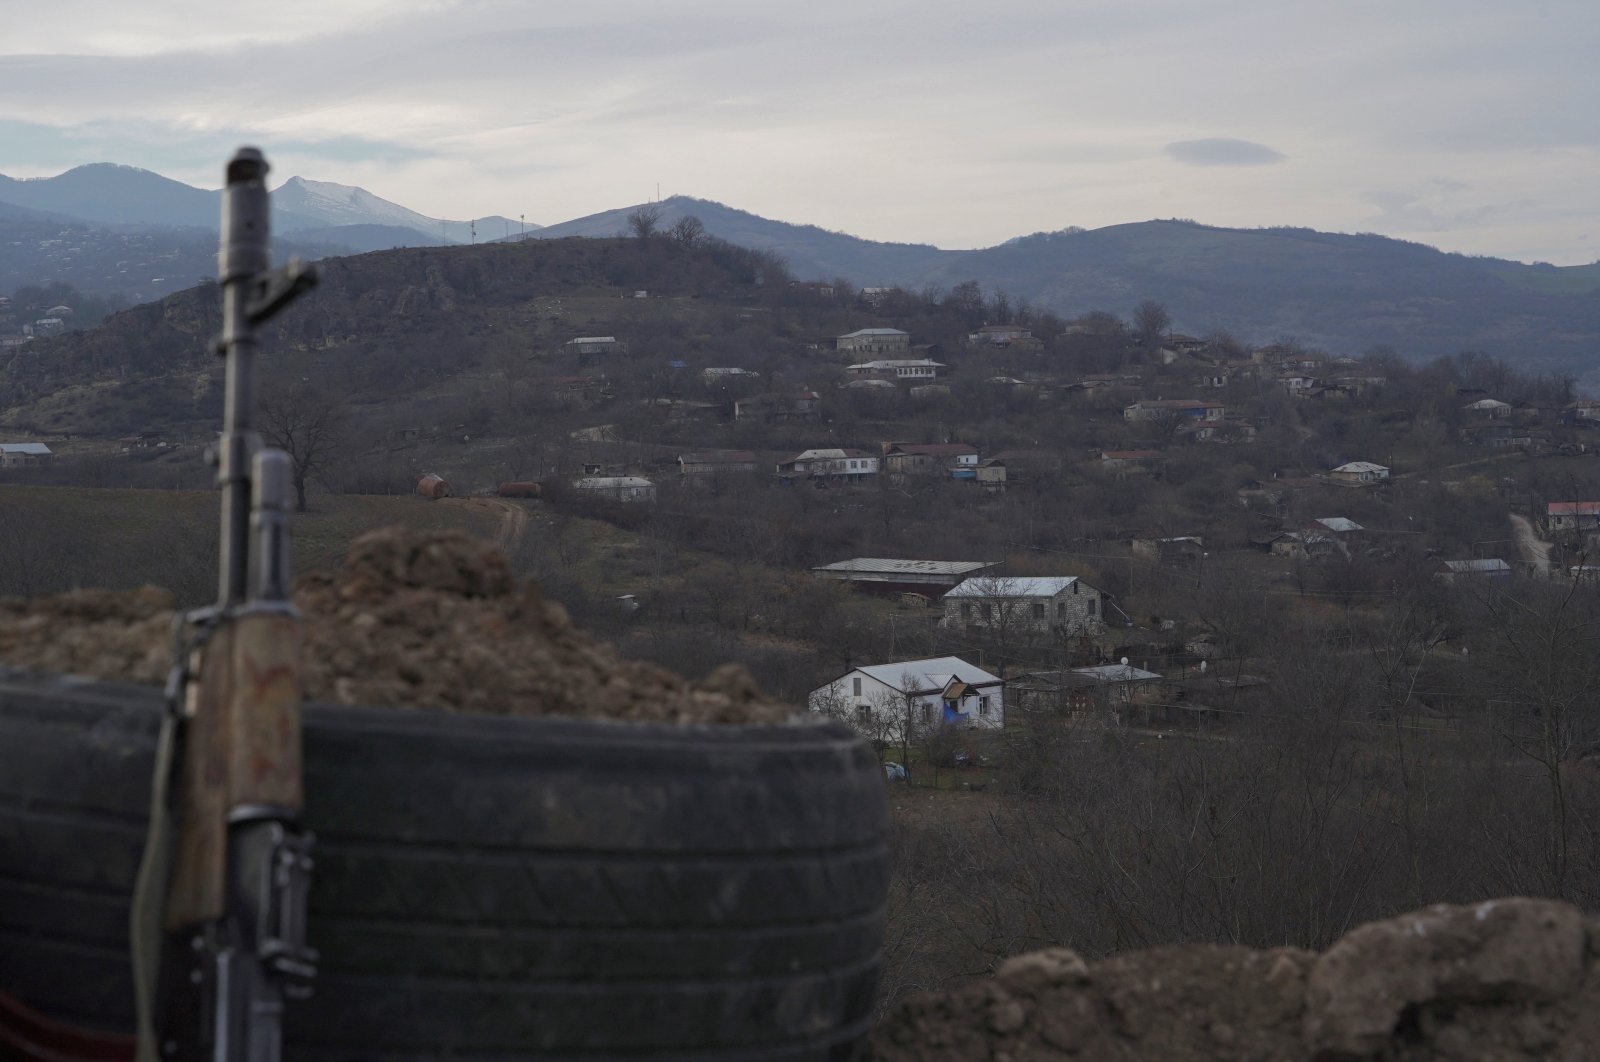 A view shows the village of Taghavard in the region of Nagorno-Karabakh, on Jan. 16, 2021. Following the military conflict over Nagorno-Karabakh and a further signing of a cease-fire deal, the village was divided between the two sides. (Reuters Photo)